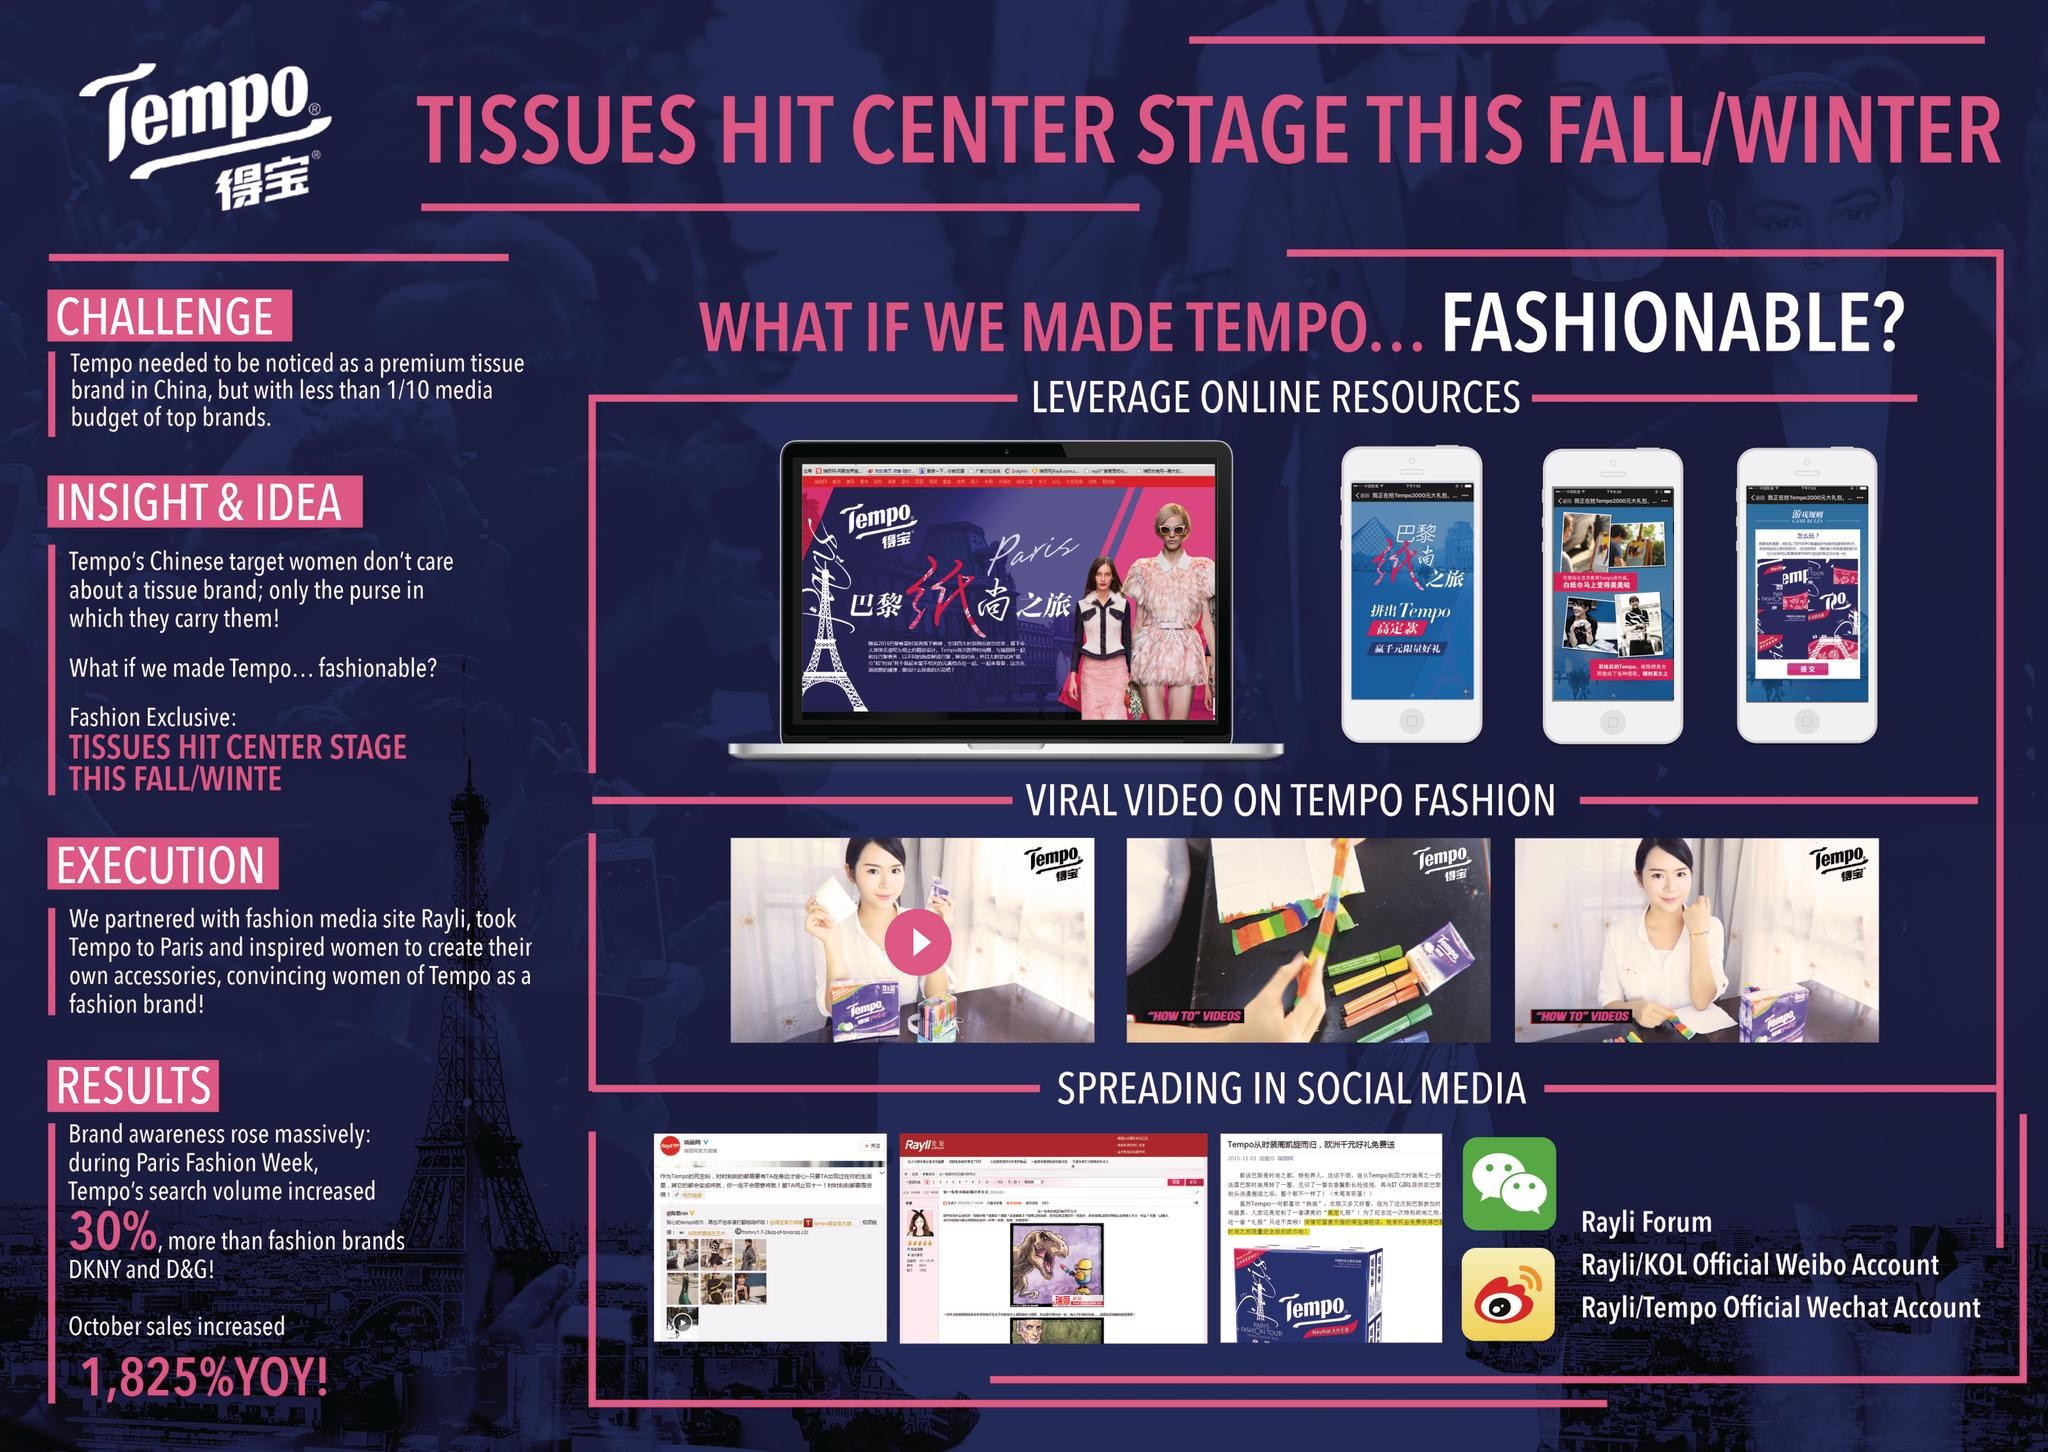 Fashion Exclusive: Tissues hit center stage this Fall/Winter